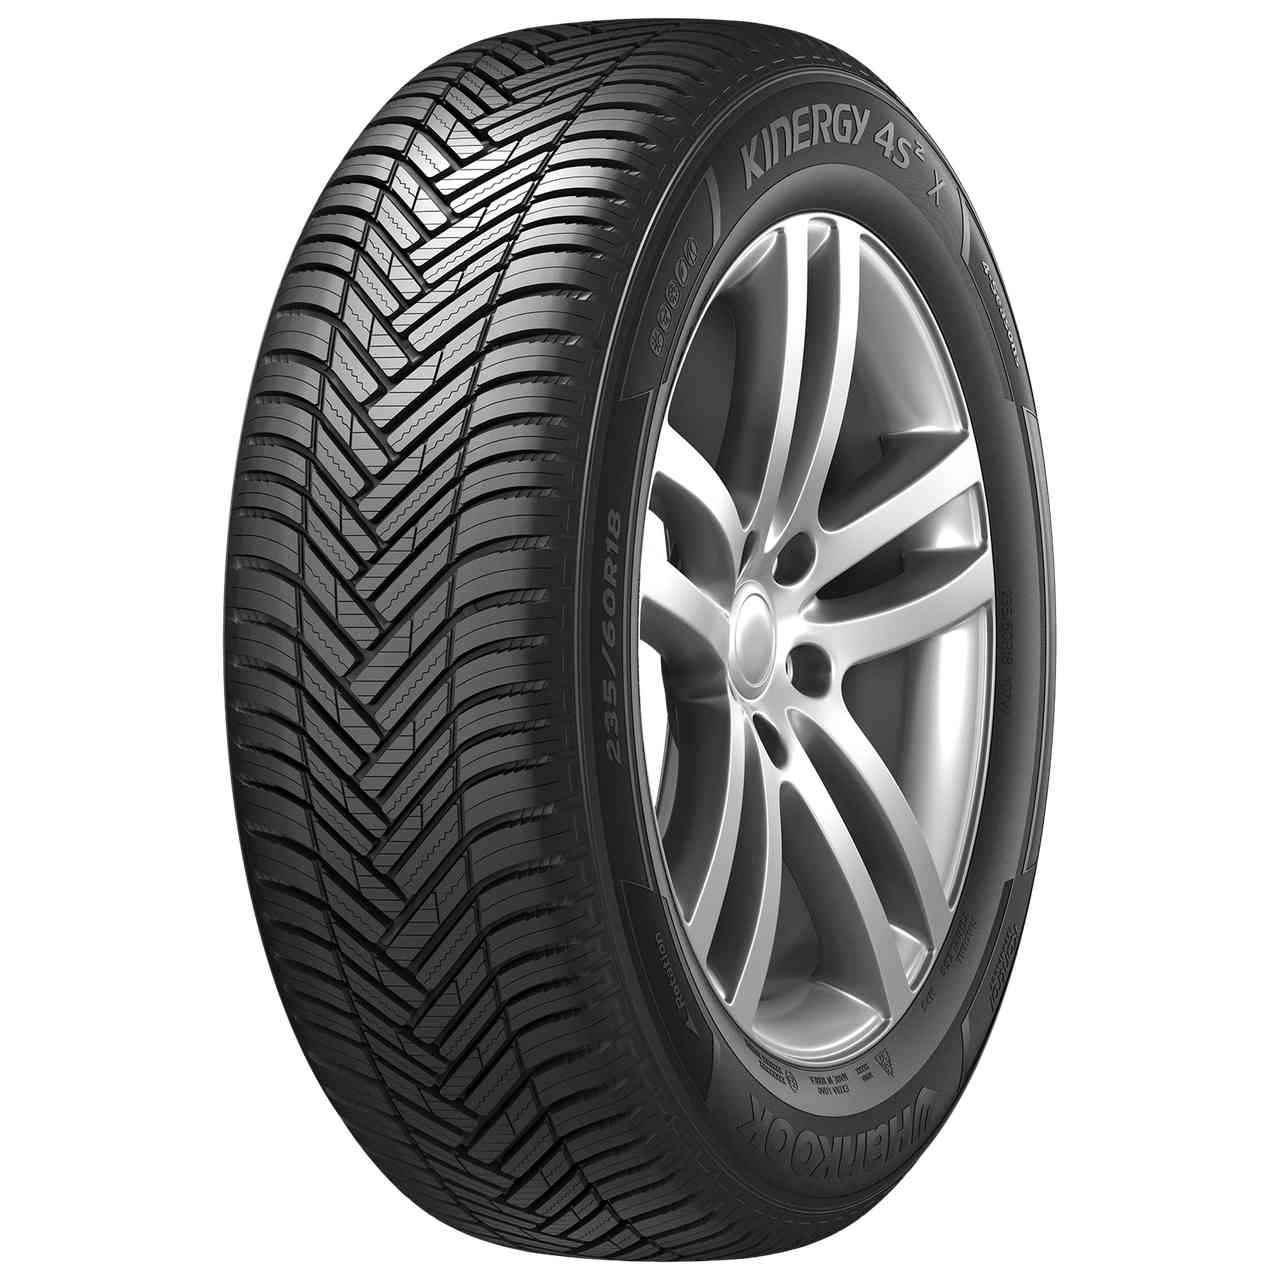 HANKOOK KINERGY 4S 2 X (H750A) 235/60R16 104V BSW